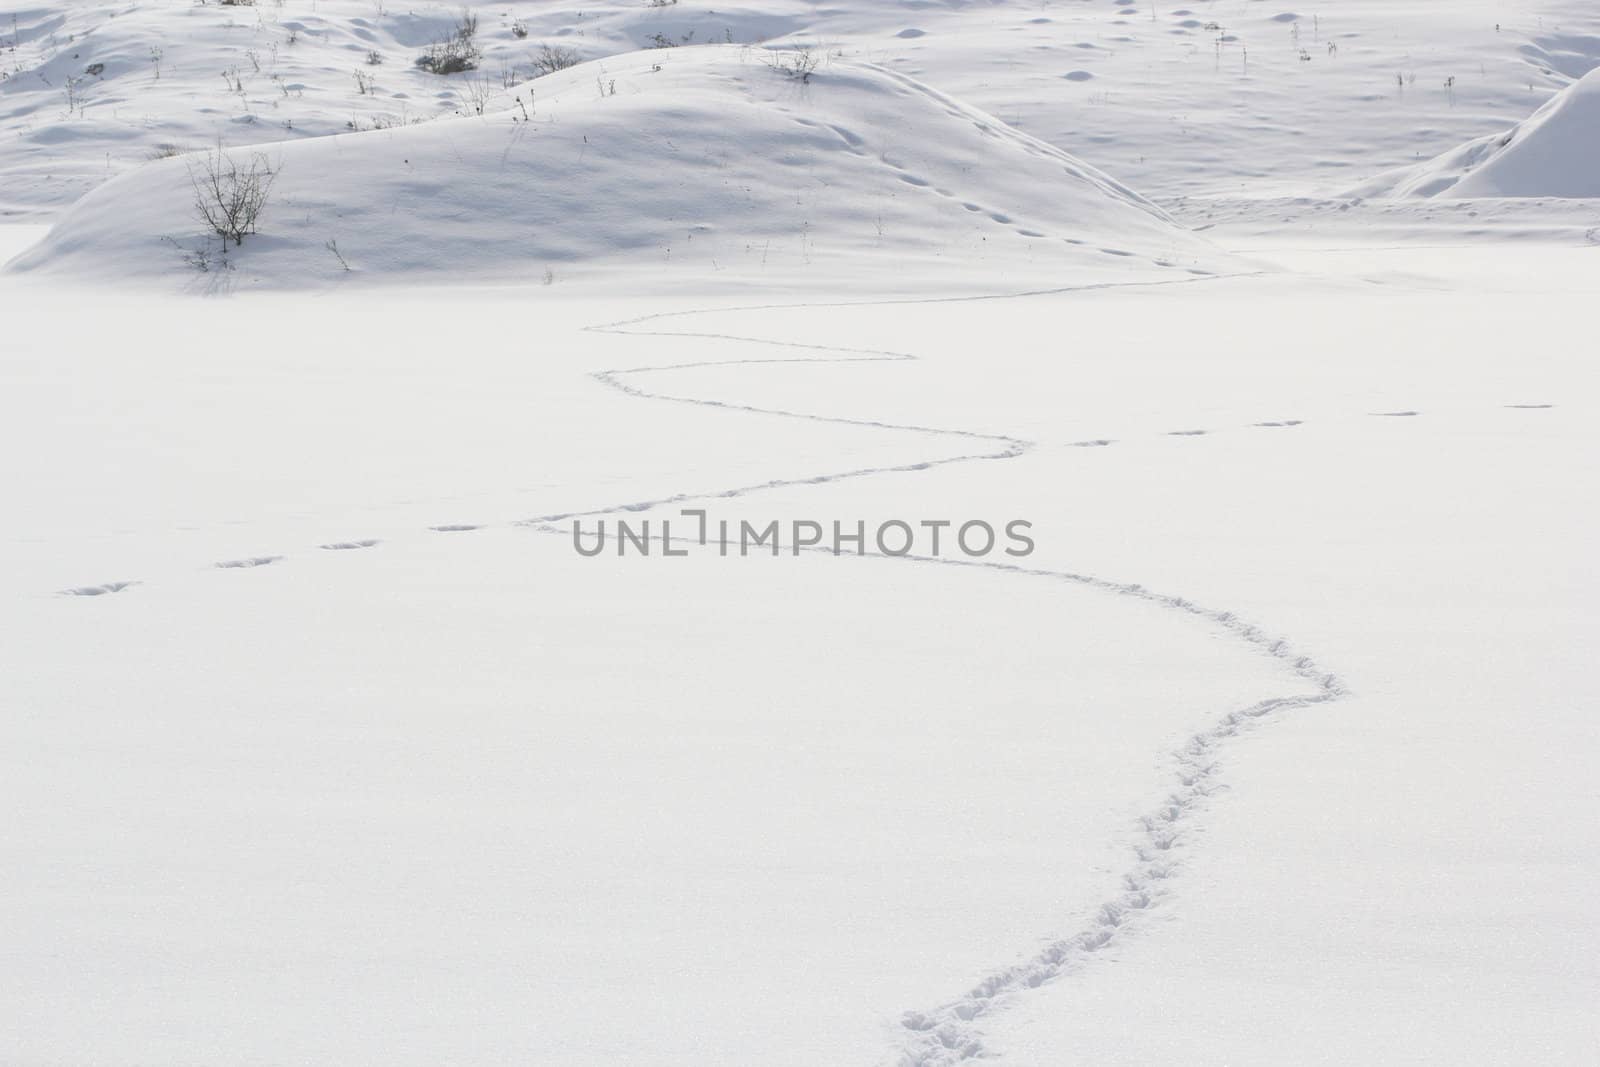 I found this fox tracks intersecting a hare path